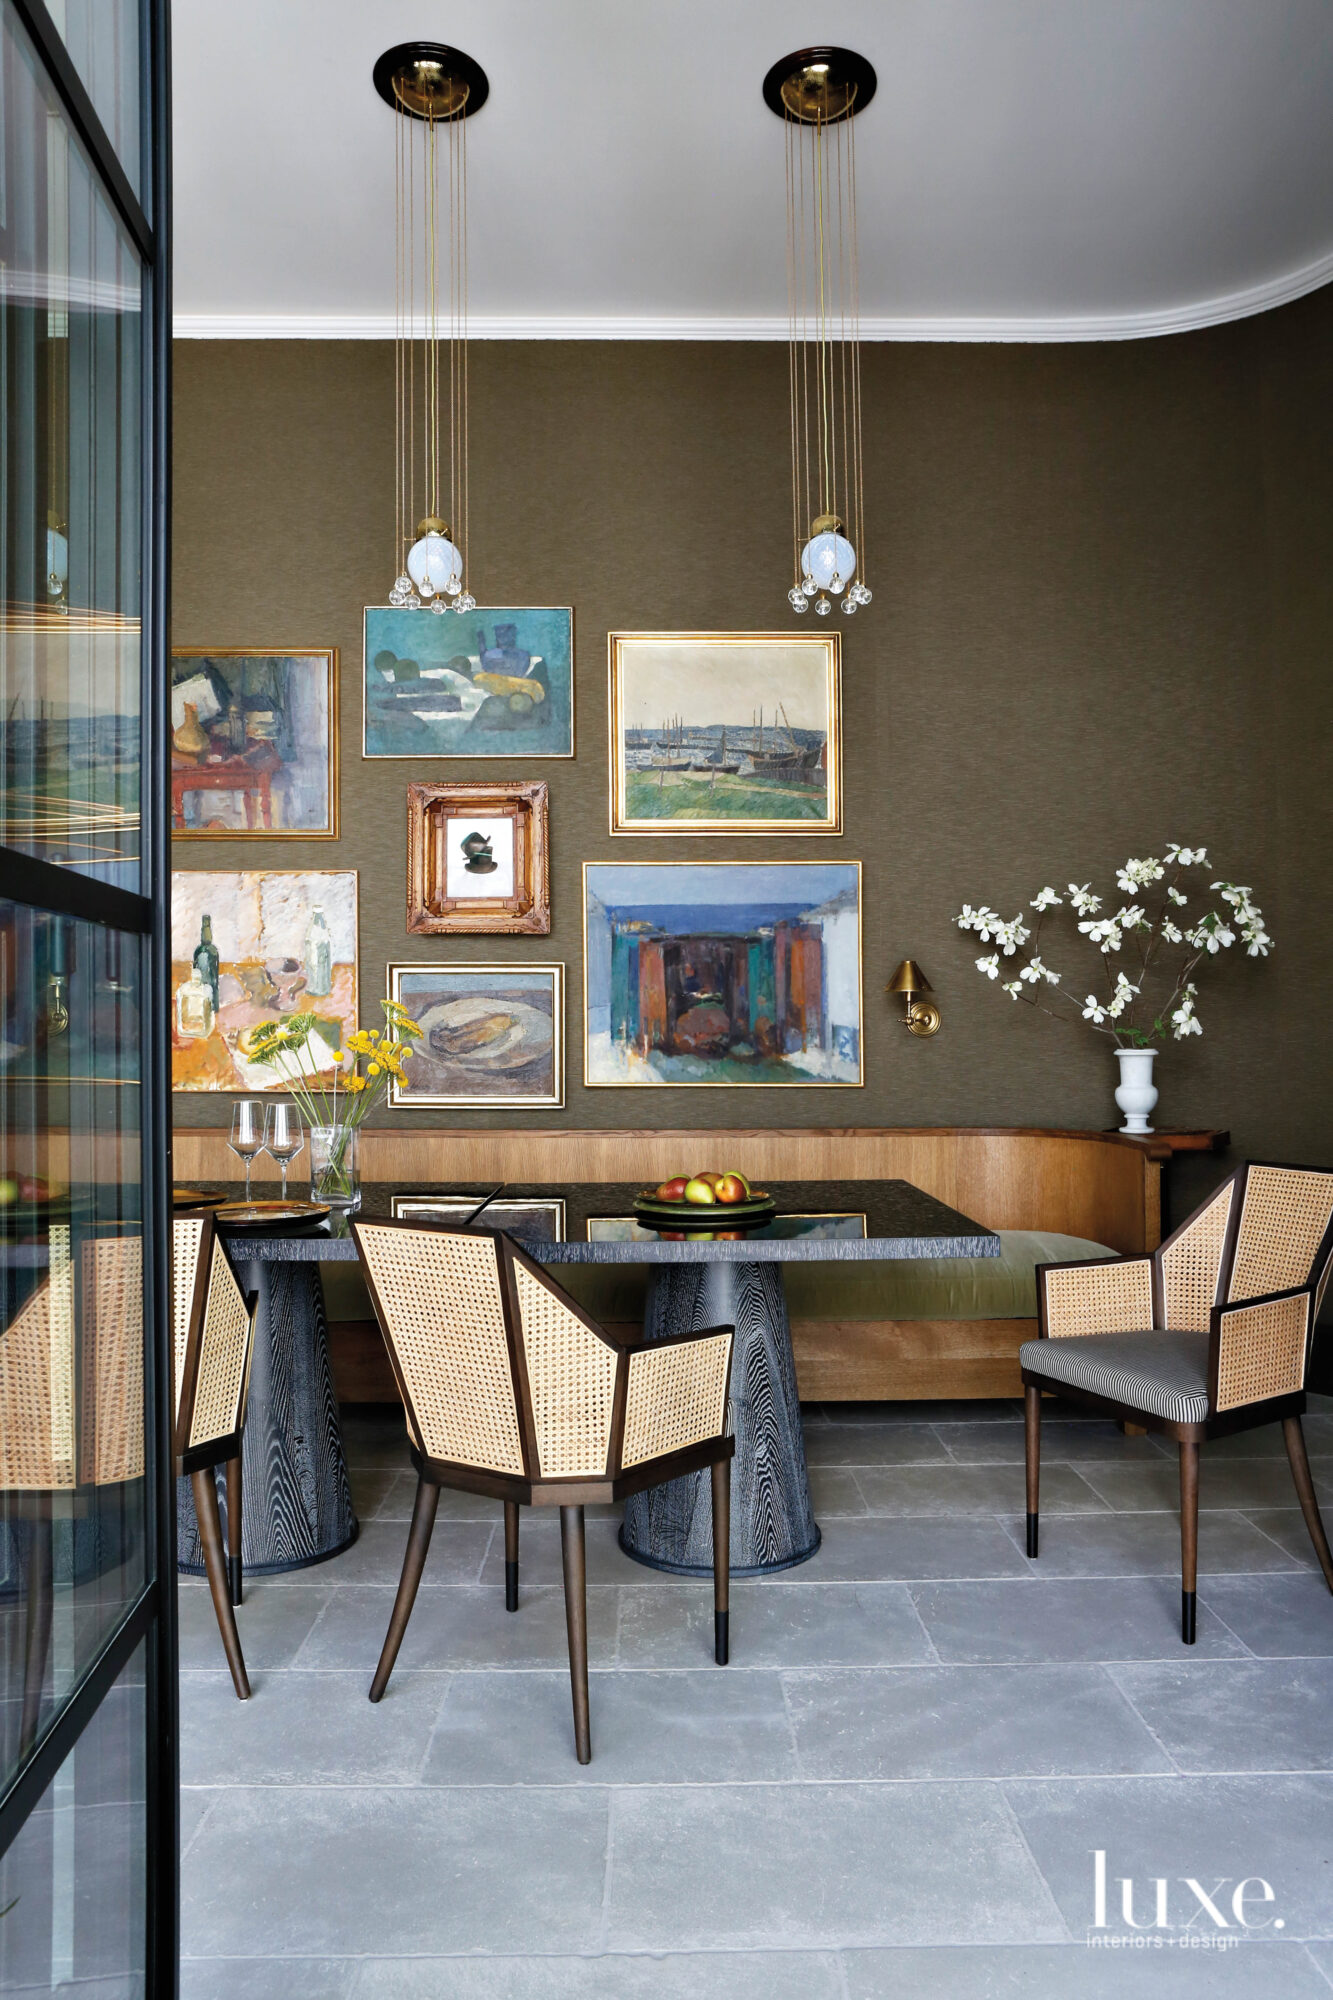 A dining room with a curved banquette, dark silk wall covering, modern armchairs and mismatched collage of framed wall art